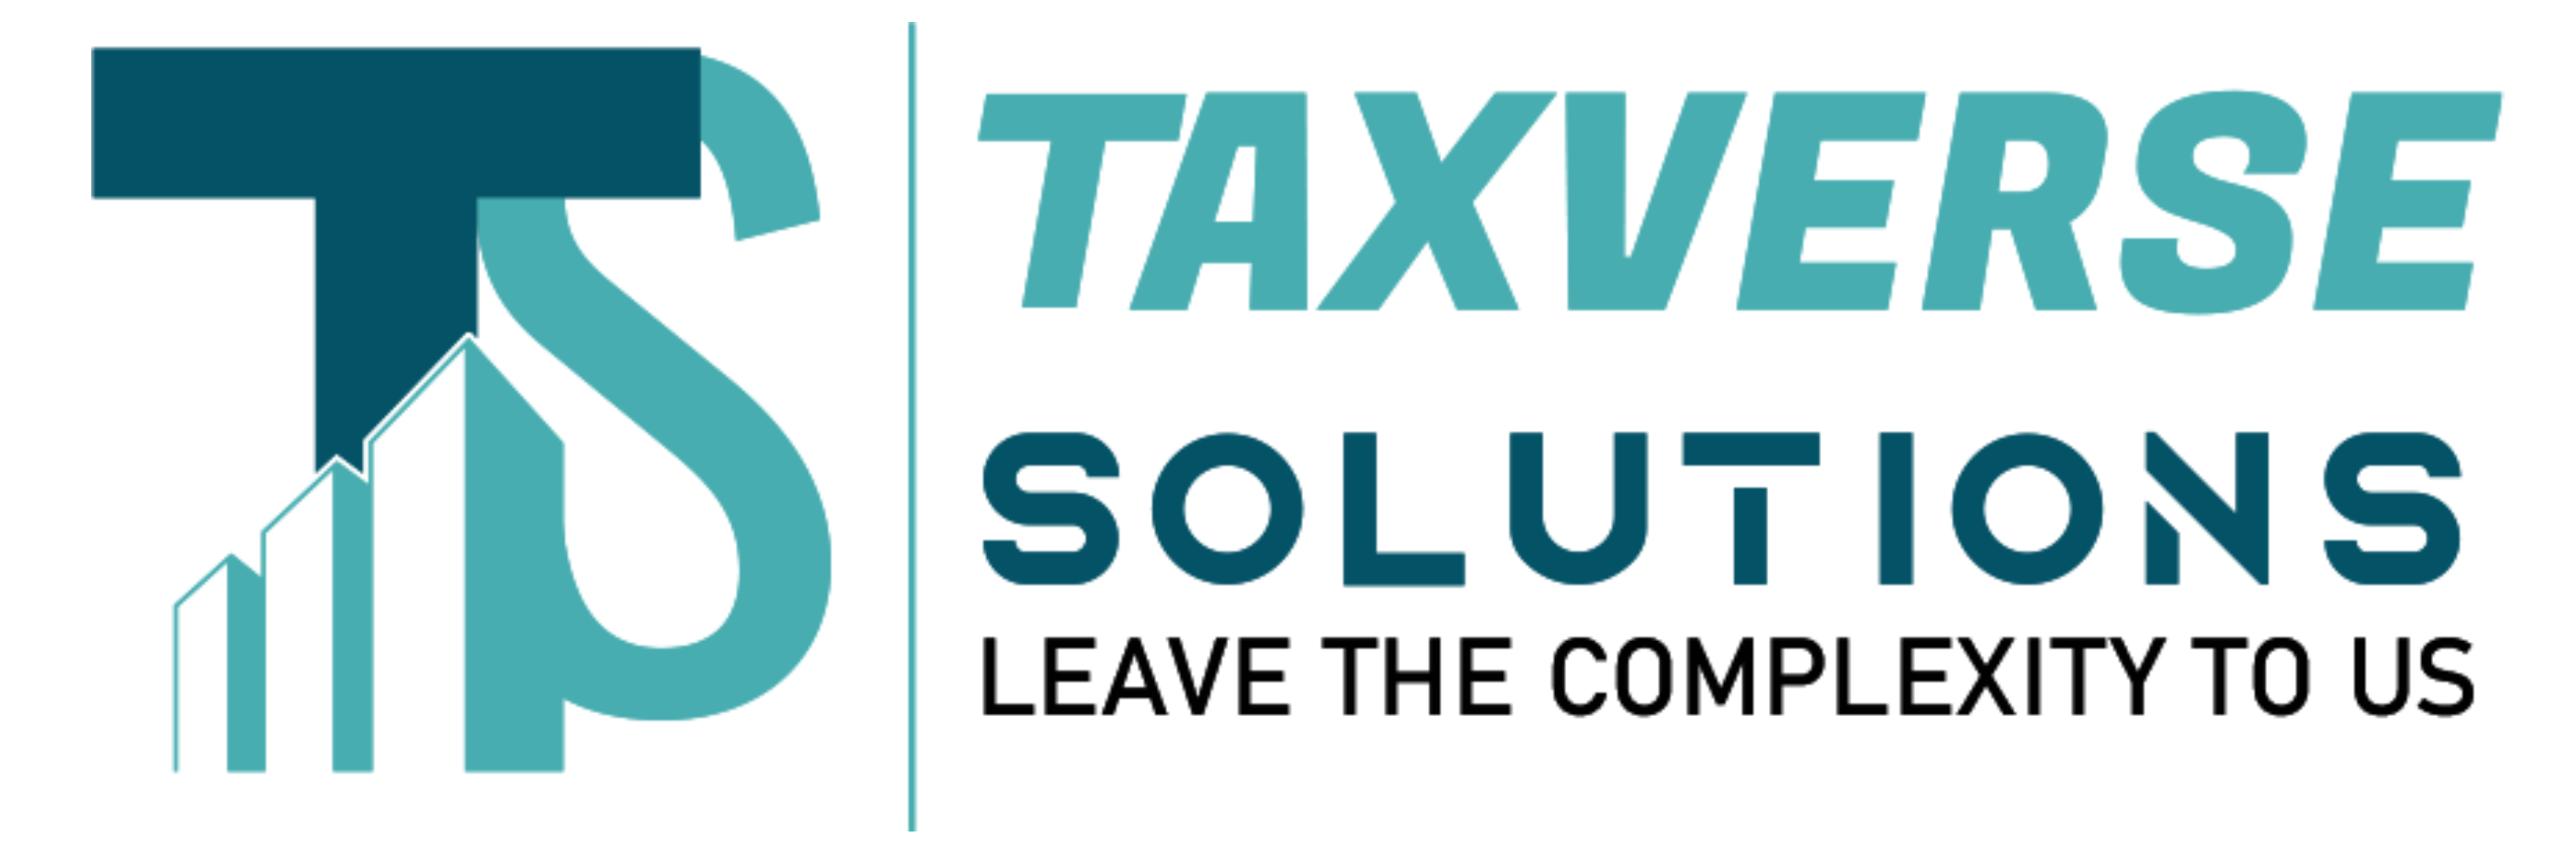 Taxverse Solution Brand Logo